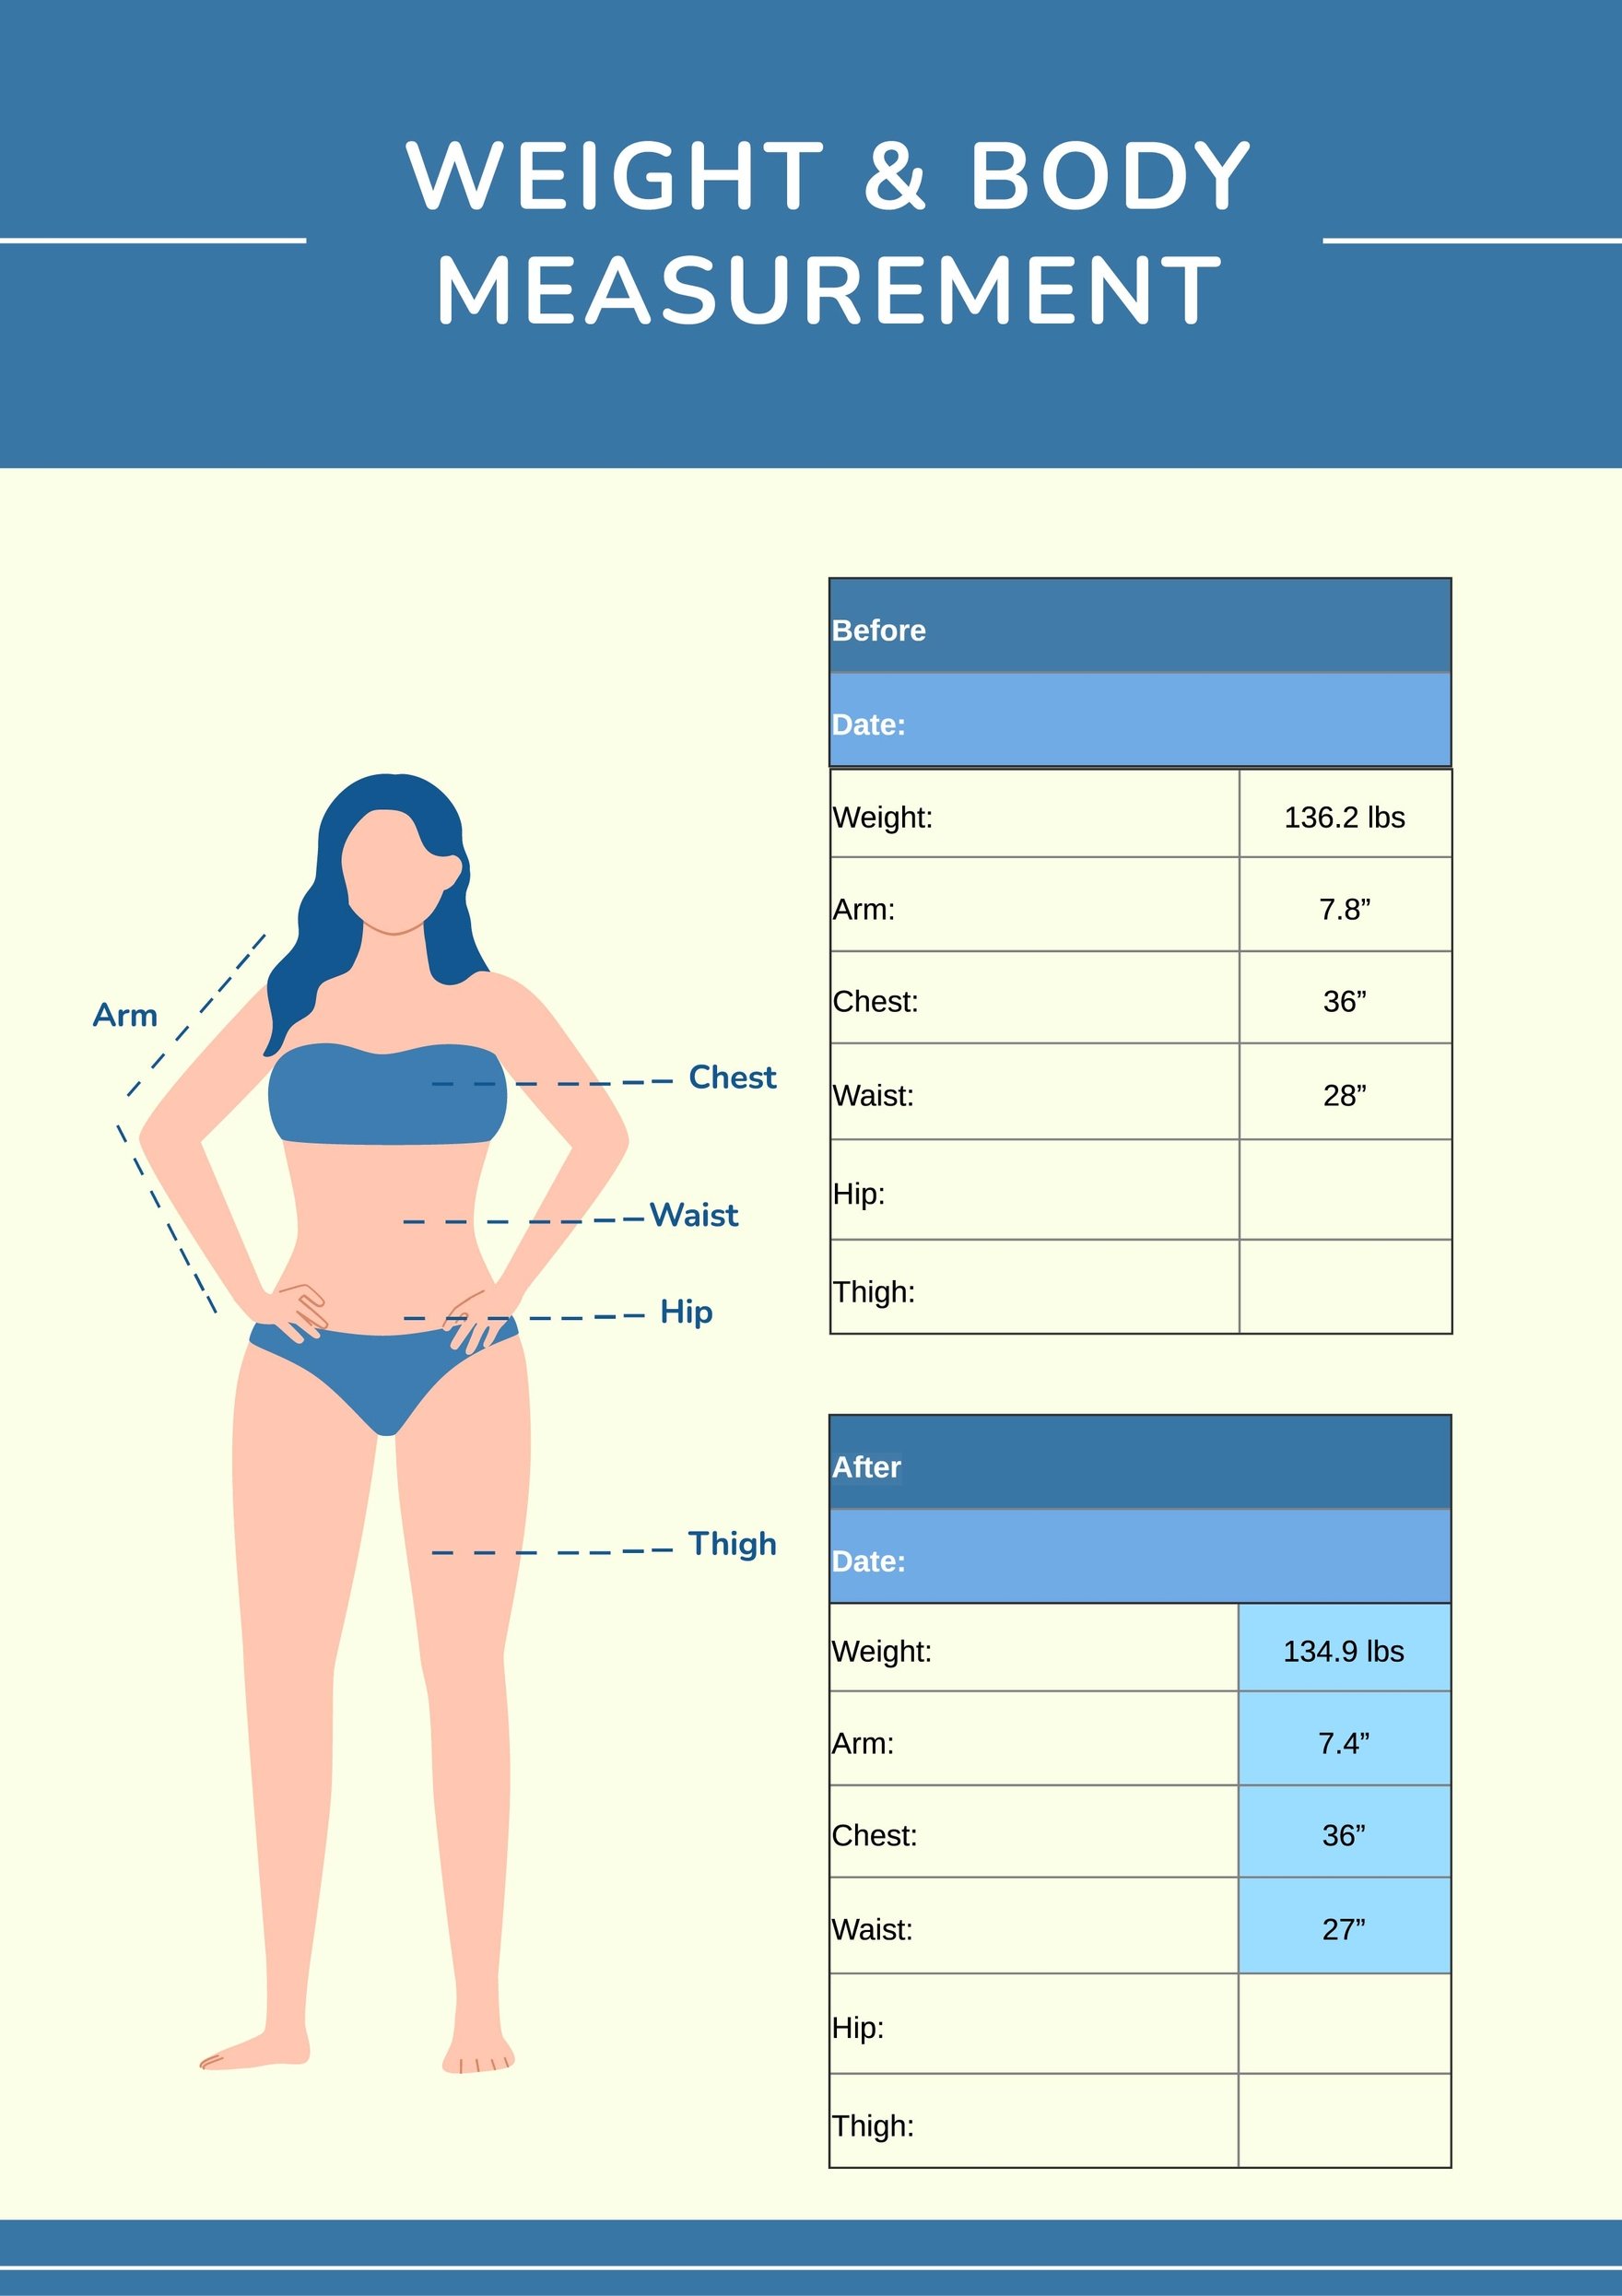 Female Body Measurement Chart in Illustrator, Portable Documents - Download